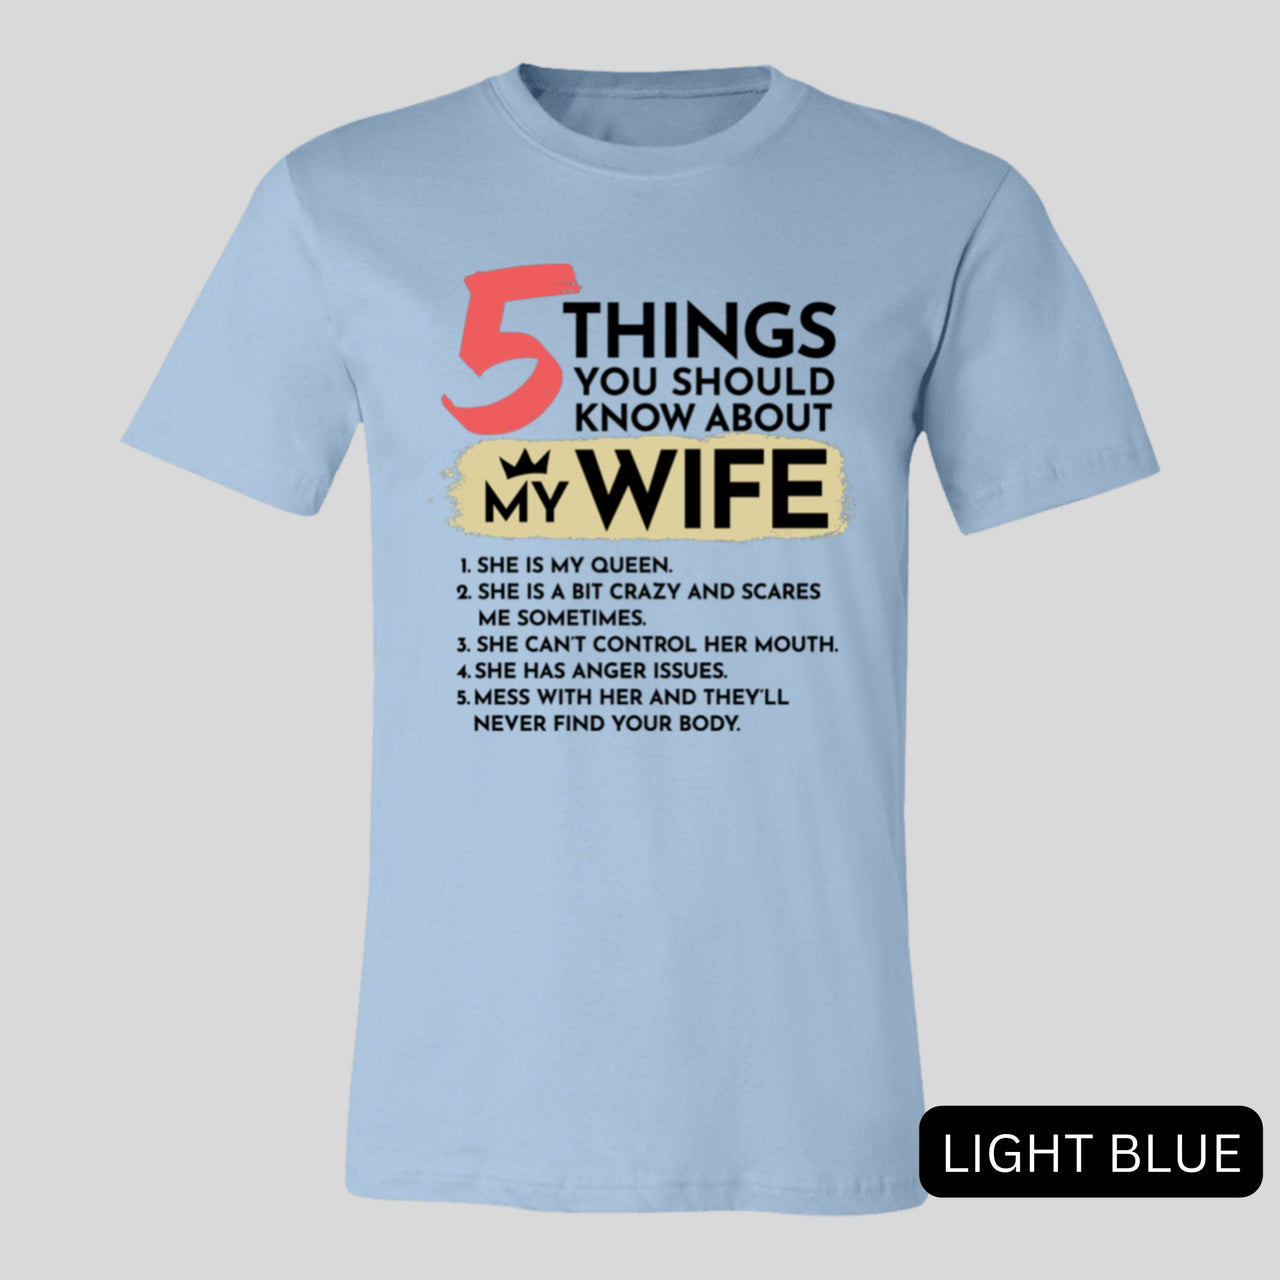 5 Things You Should Know About My Wife Tee